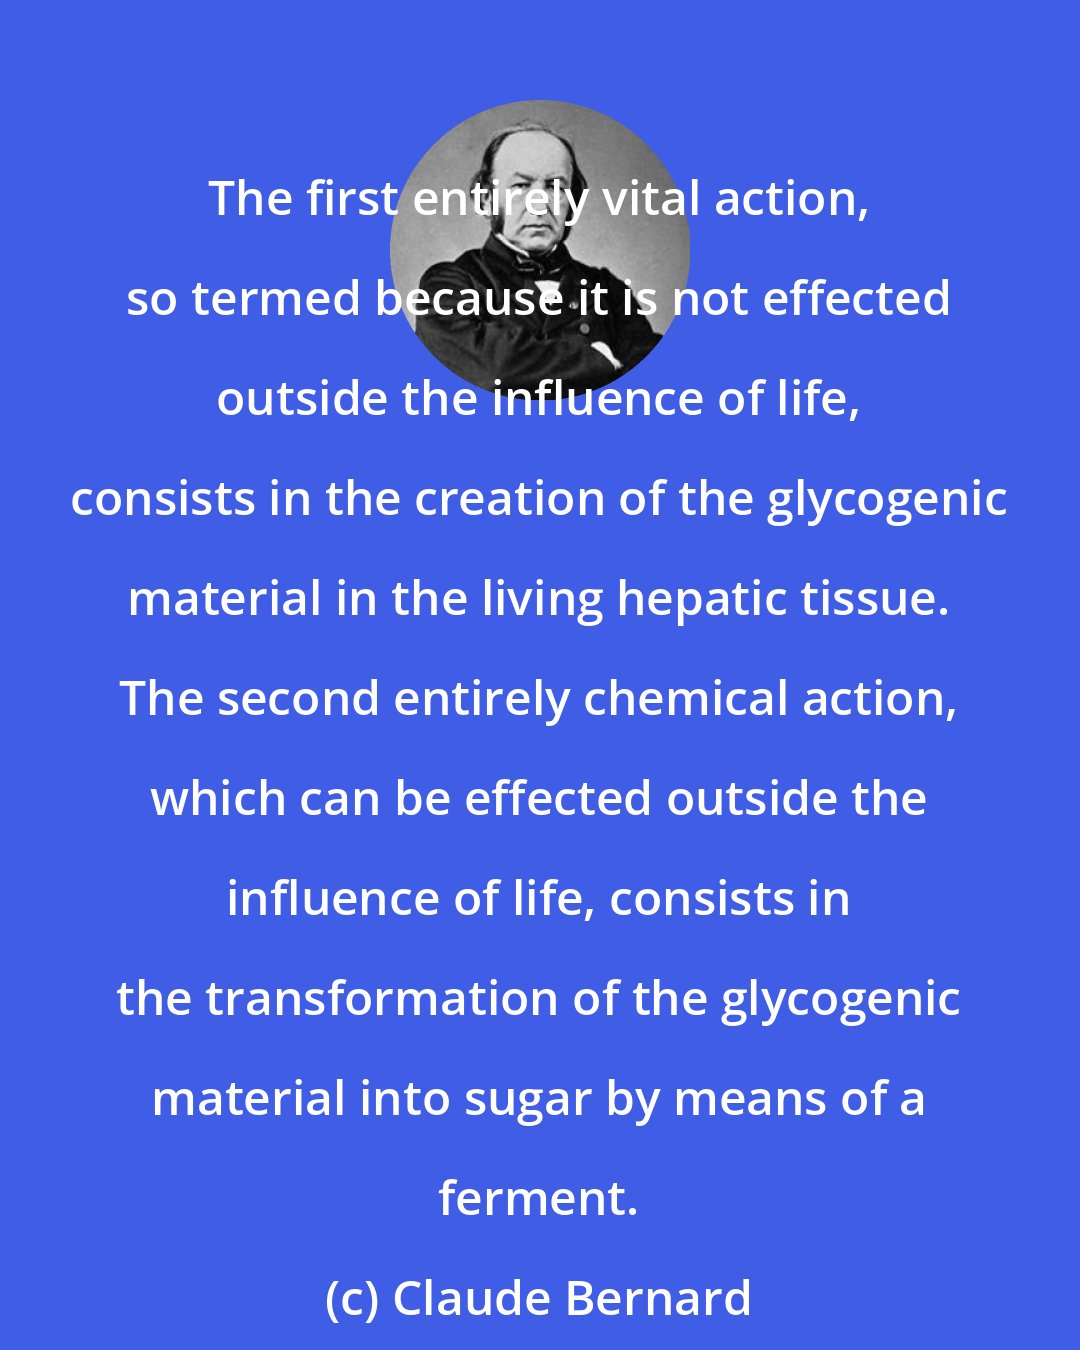 Claude Bernard: The first entirely vital action, so termed because it is not effected outside the influence of life, consists in the creation of the glycogenic material in the living hepatic tissue. The second entirely chemical action, which can be effected outside the influence of life, consists in the transformation of the glycogenic material into sugar by means of a ferment.